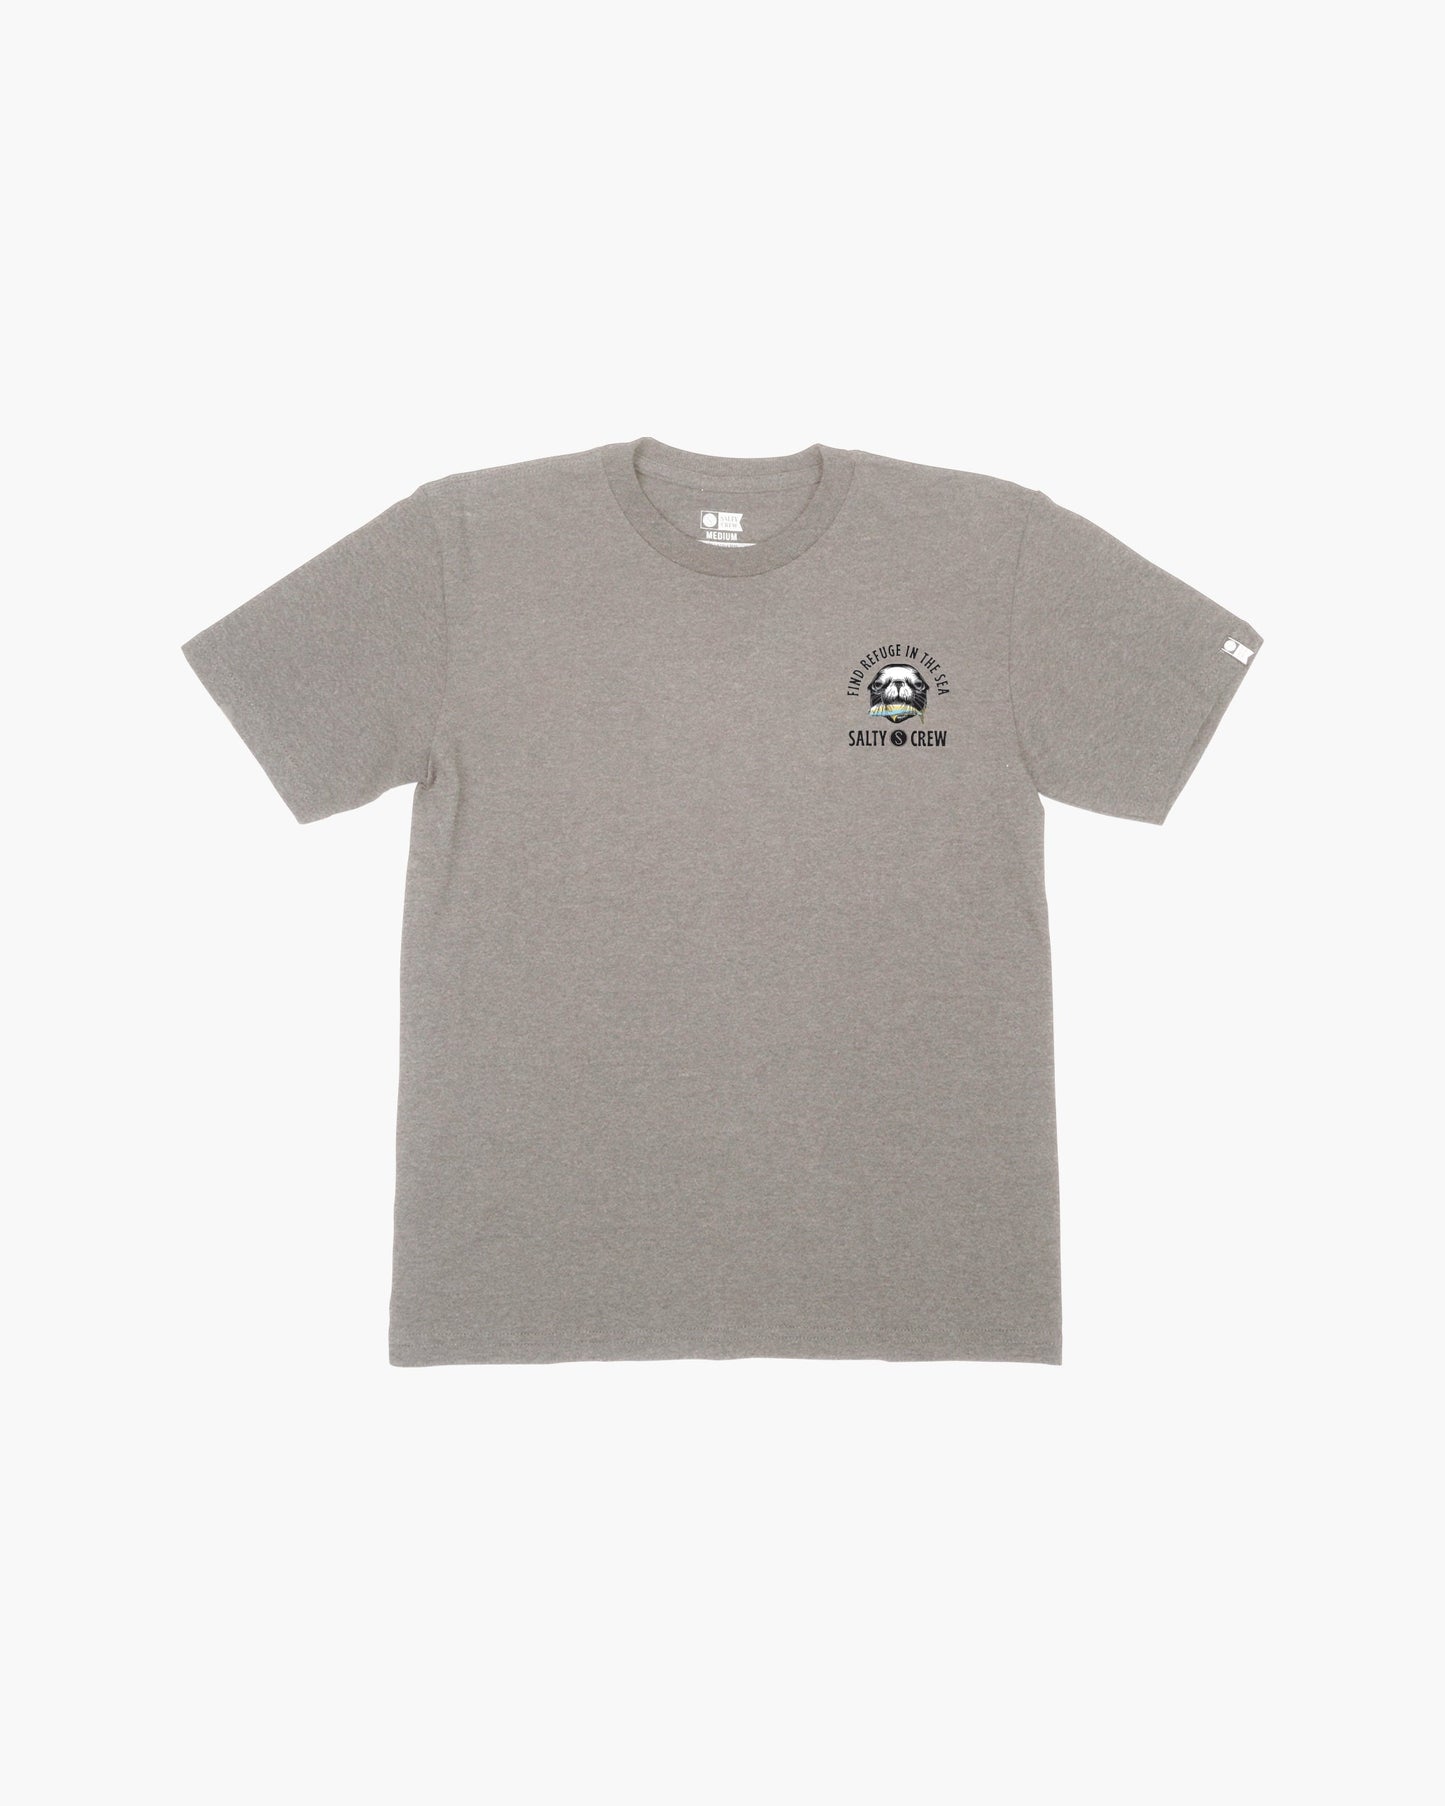 MOUTHFUL BOYS S/S TEE - Athletic Heather